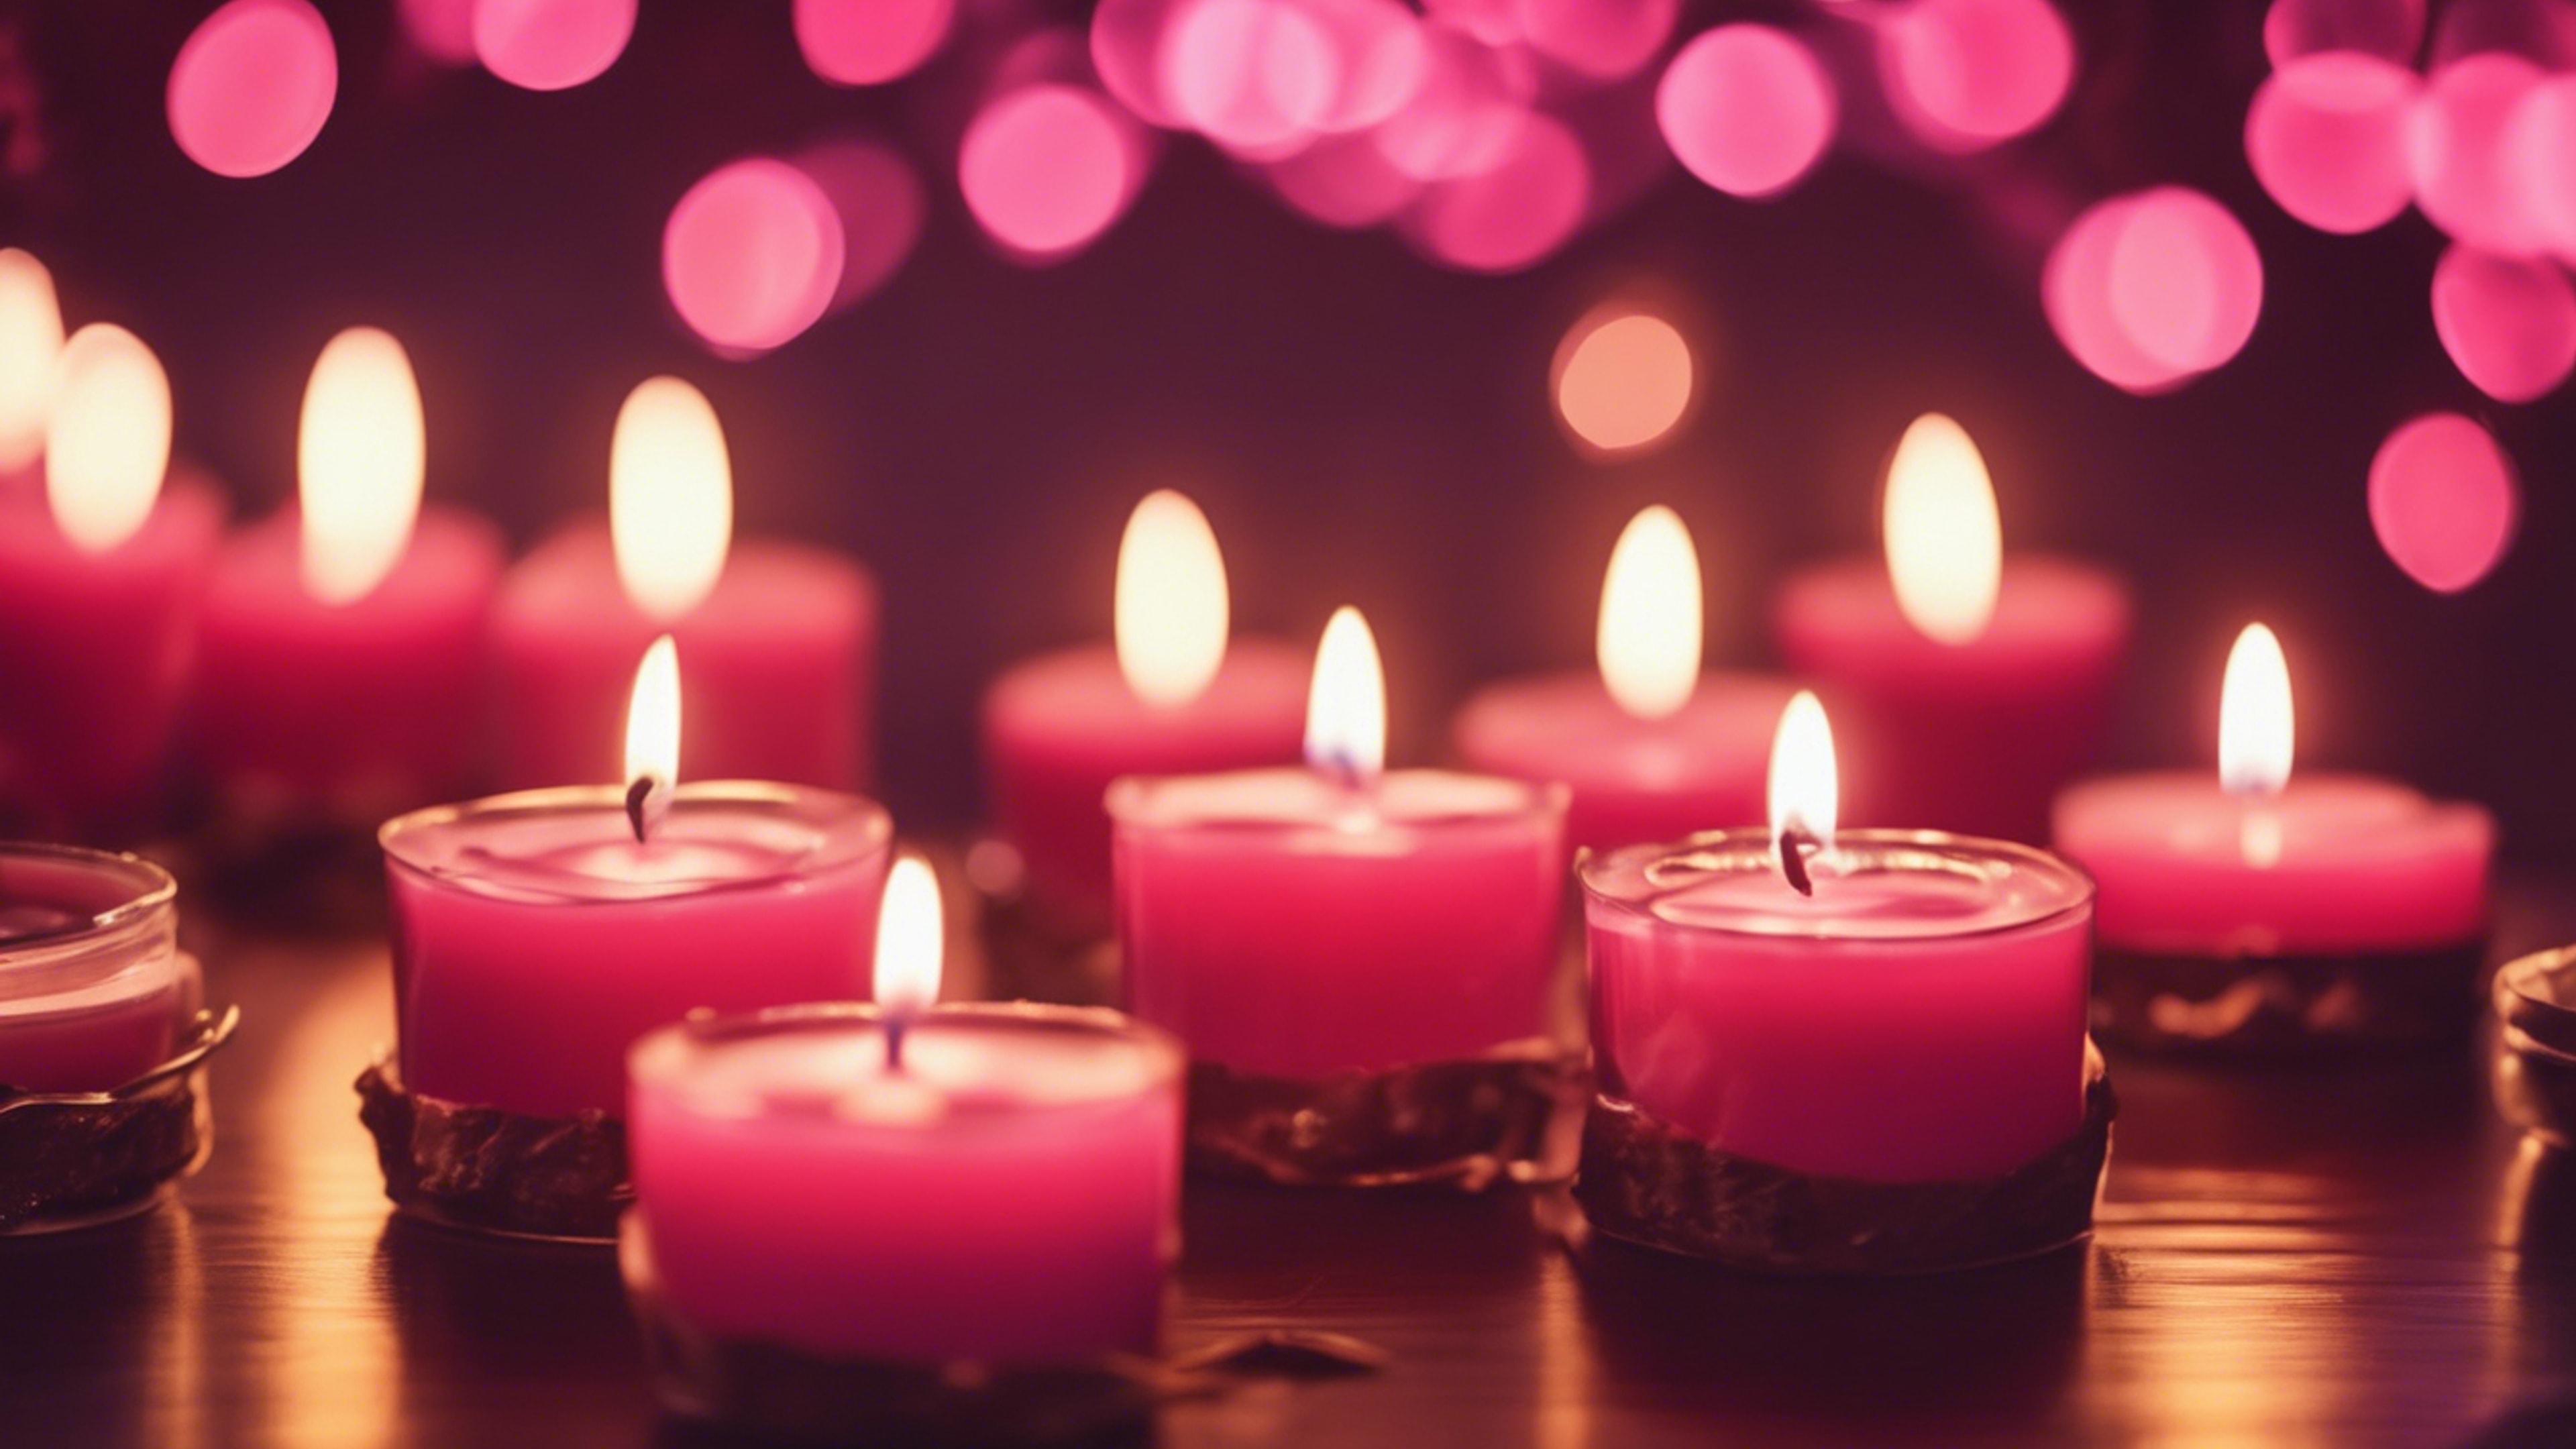 Candles with a cherry aroma and pink color, emitting a warm and cozy light.壁紙[7e452f65f84c49f29ab6]